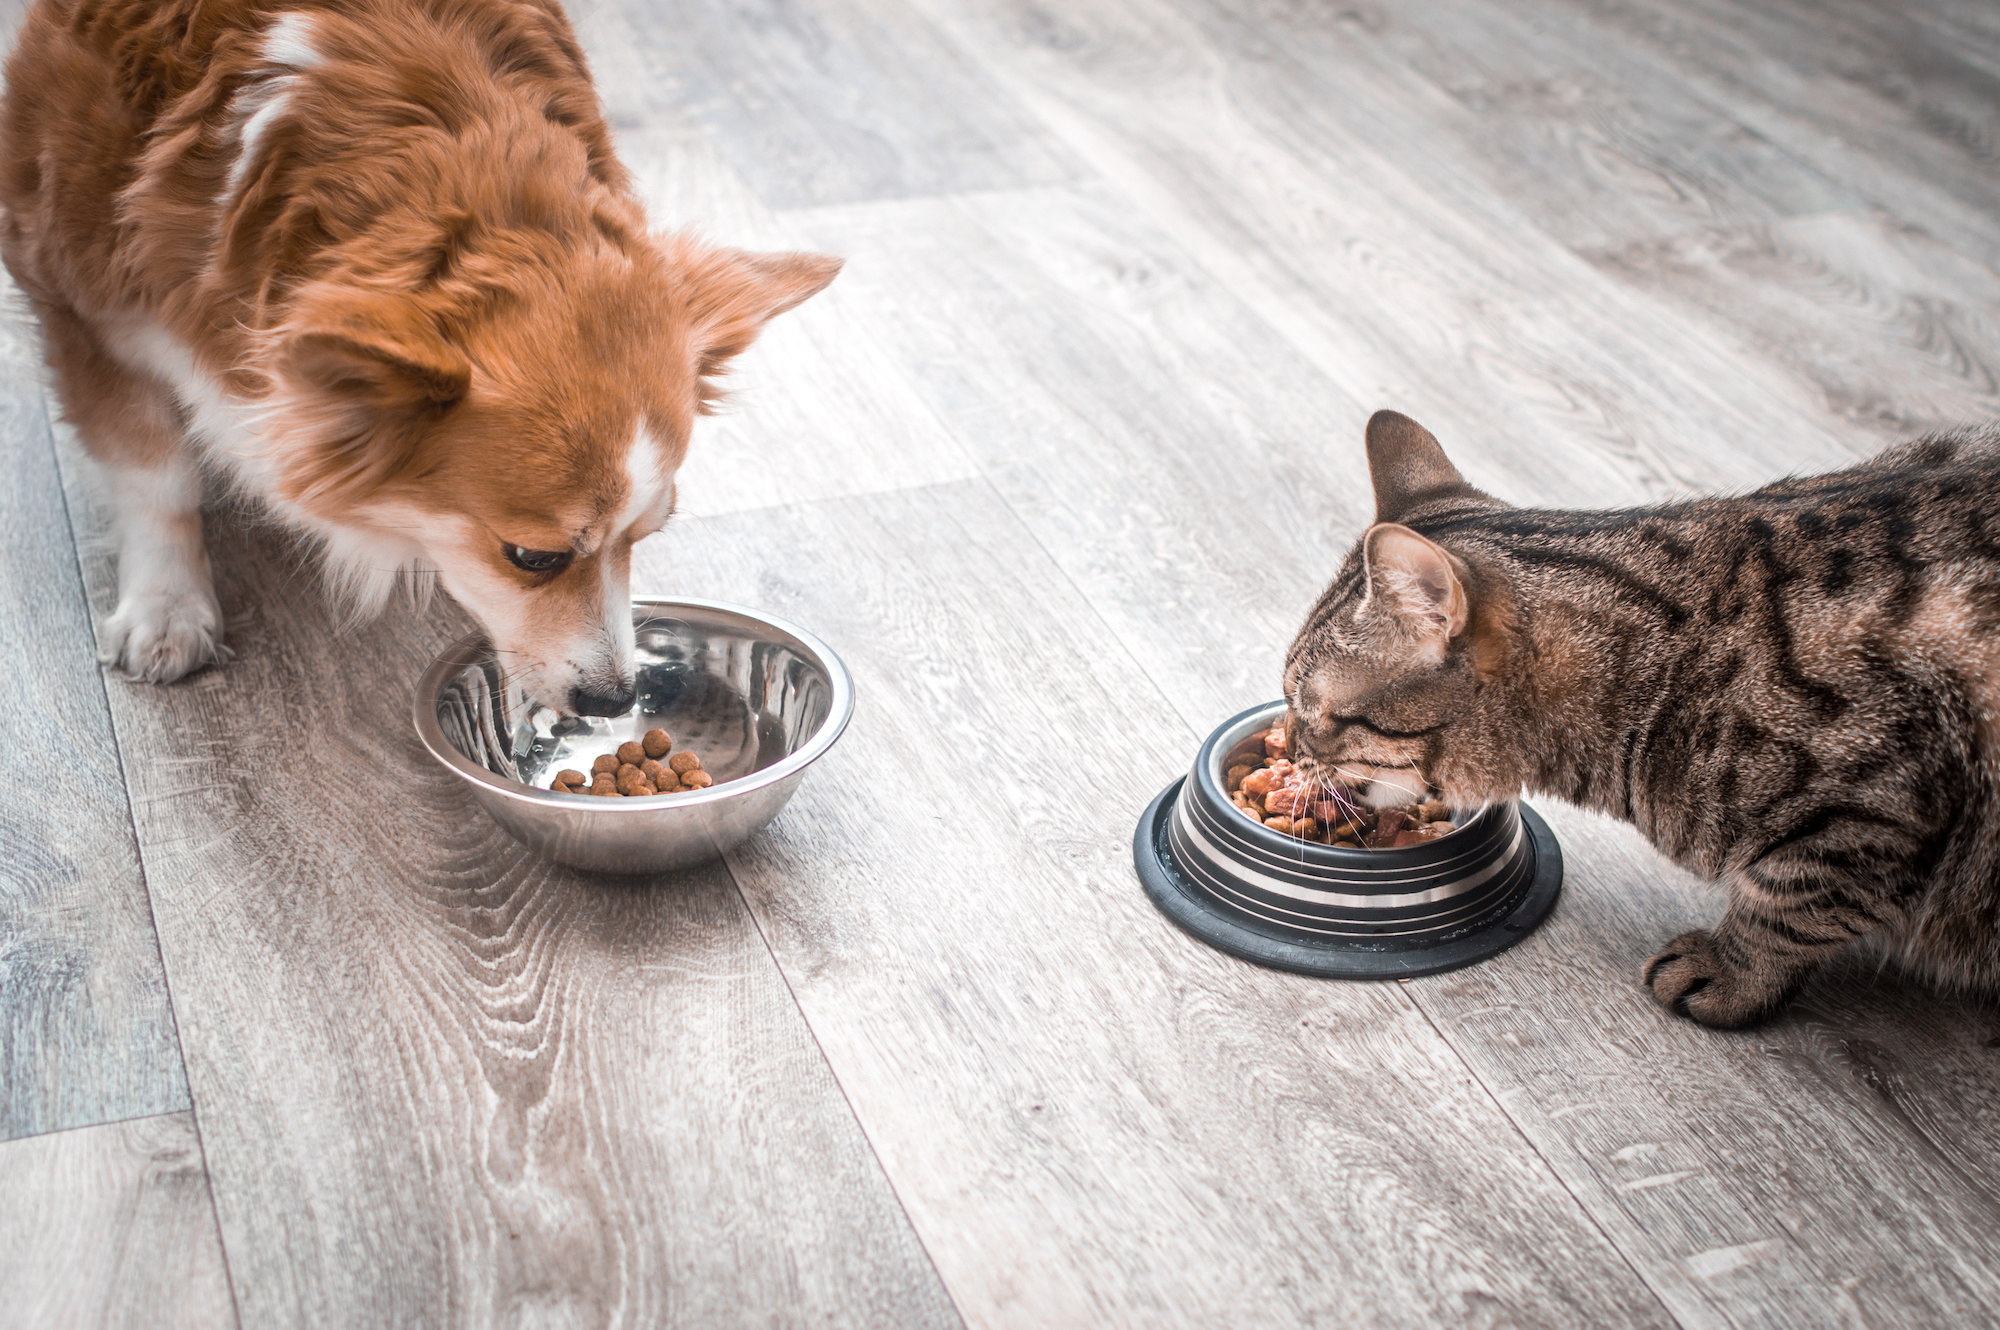 How to Select the Best Food for Your Dog or Cat